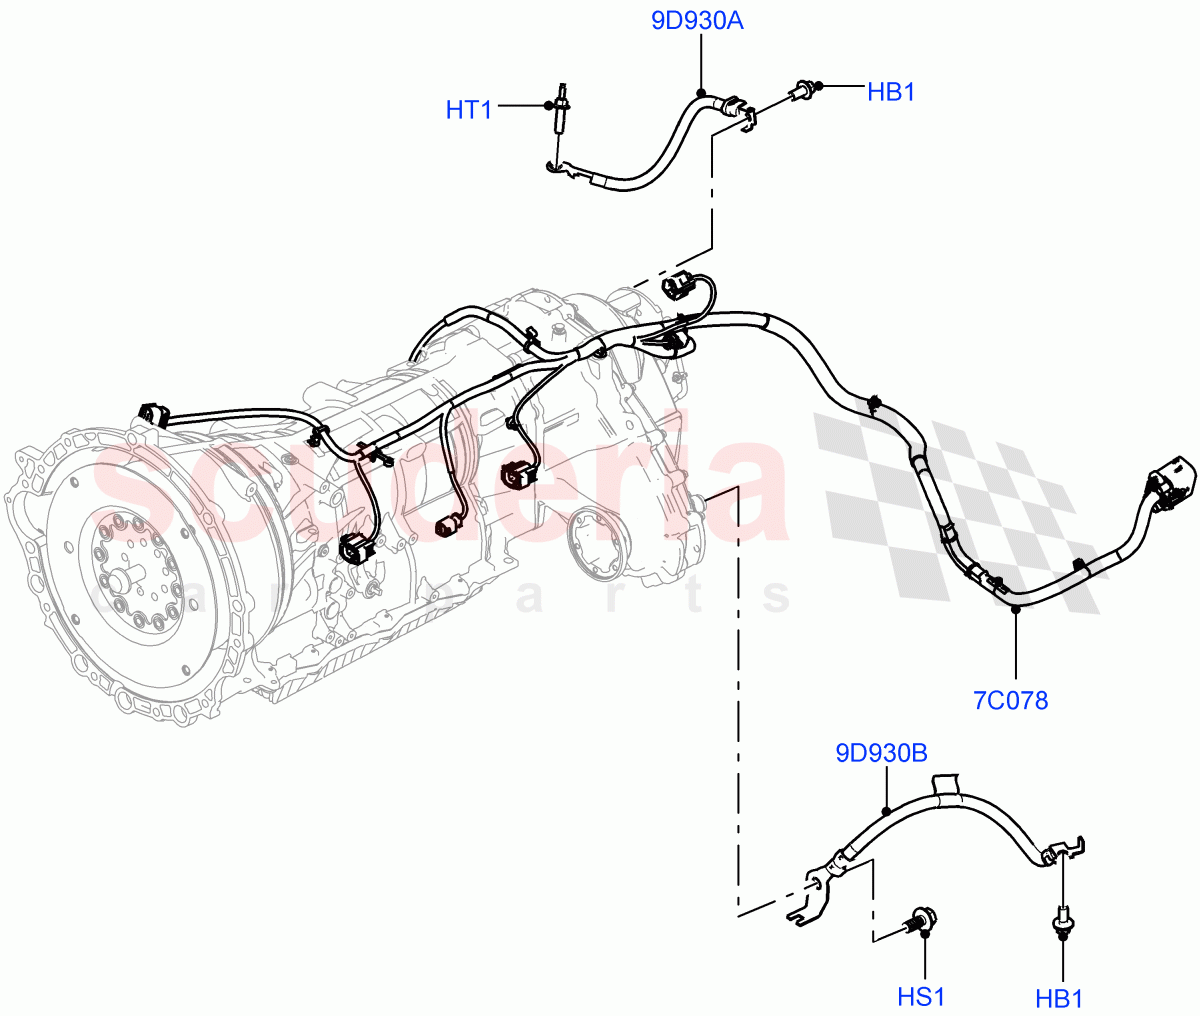 Transmission Harness(Solihull Plant Build)((V)FROMHA000001) of Land Rover Land Rover Discovery 5 (2017+) [2.0 Turbo Petrol AJ200P]